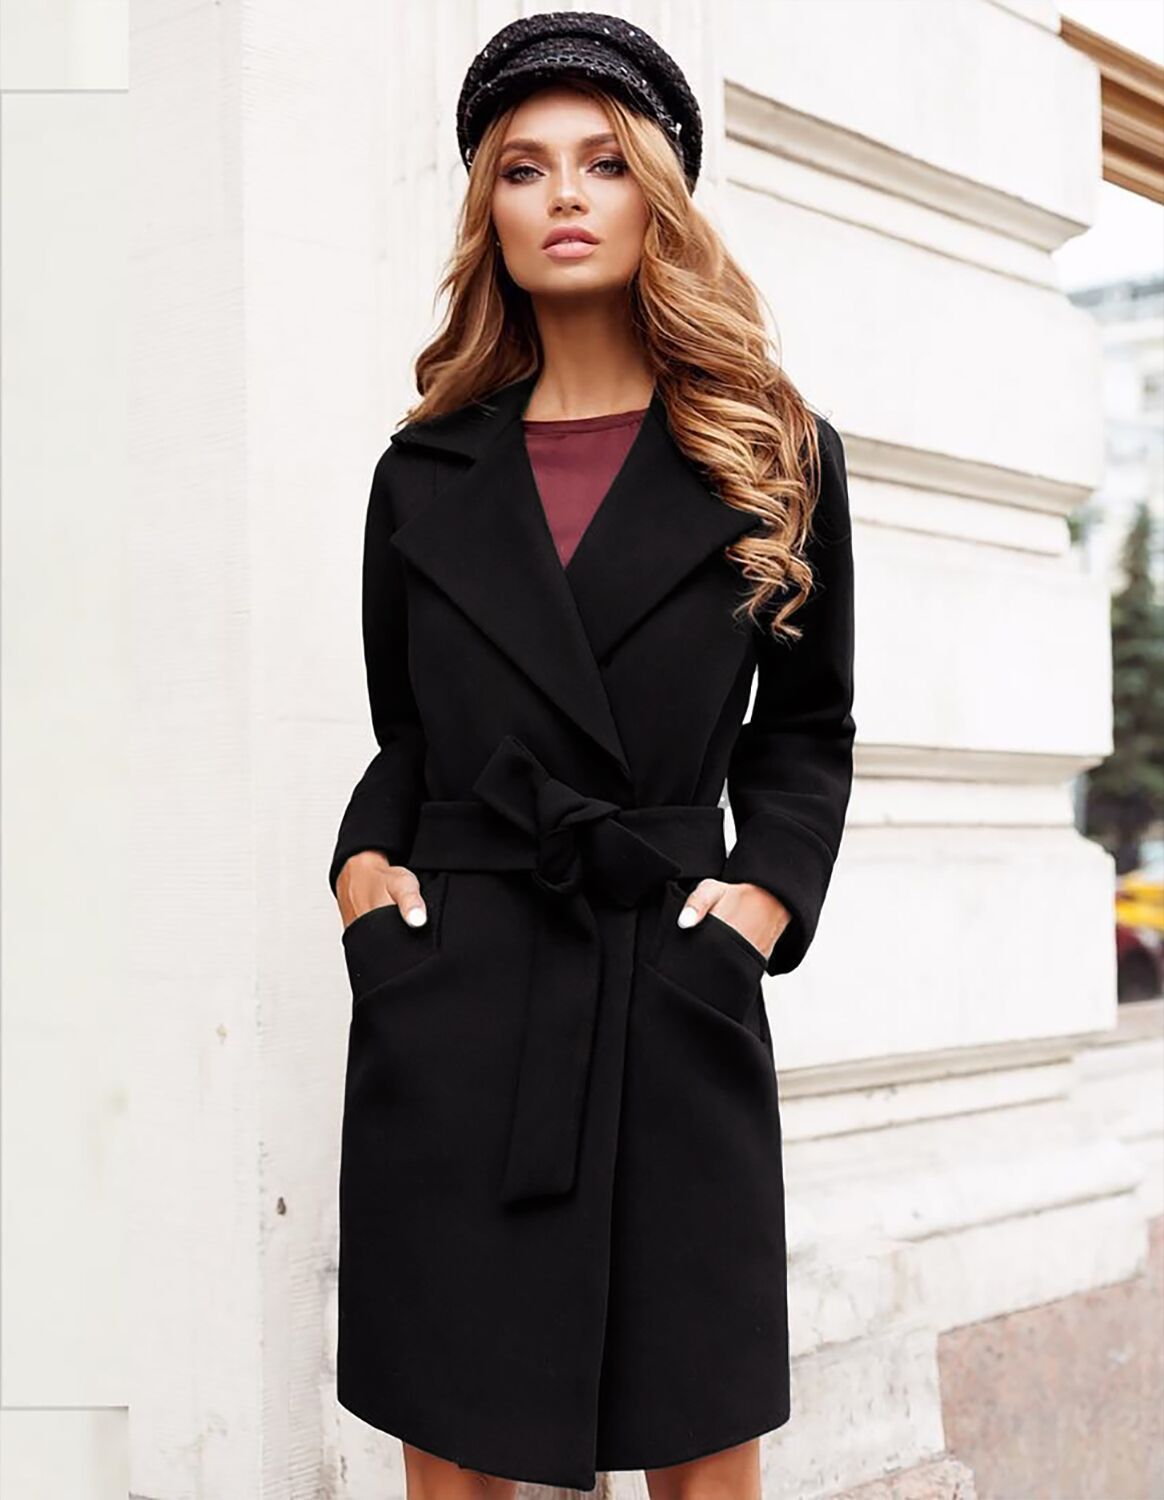 Notched Lapel Collar Belted Wool Blend Coat